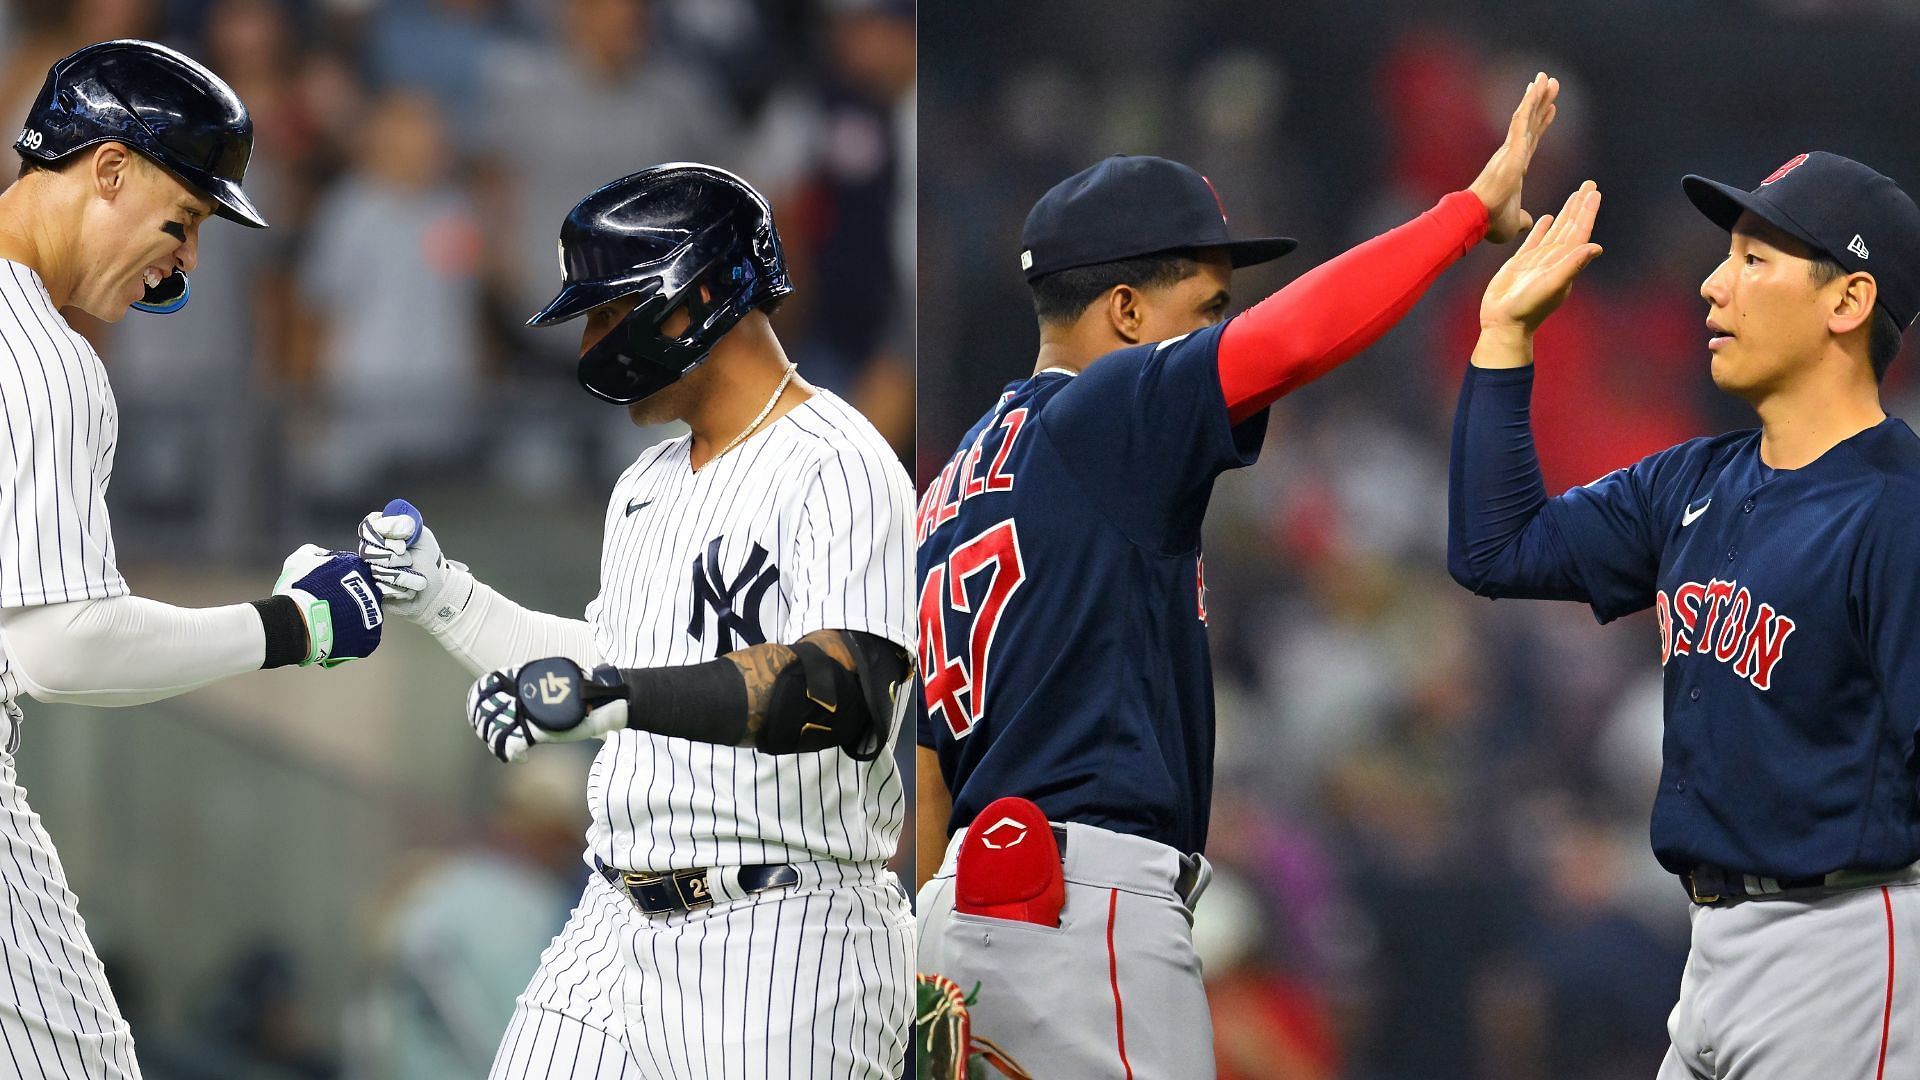 1 former player the Yankees, Red Sox and Astros could use in 2023 - Page 4